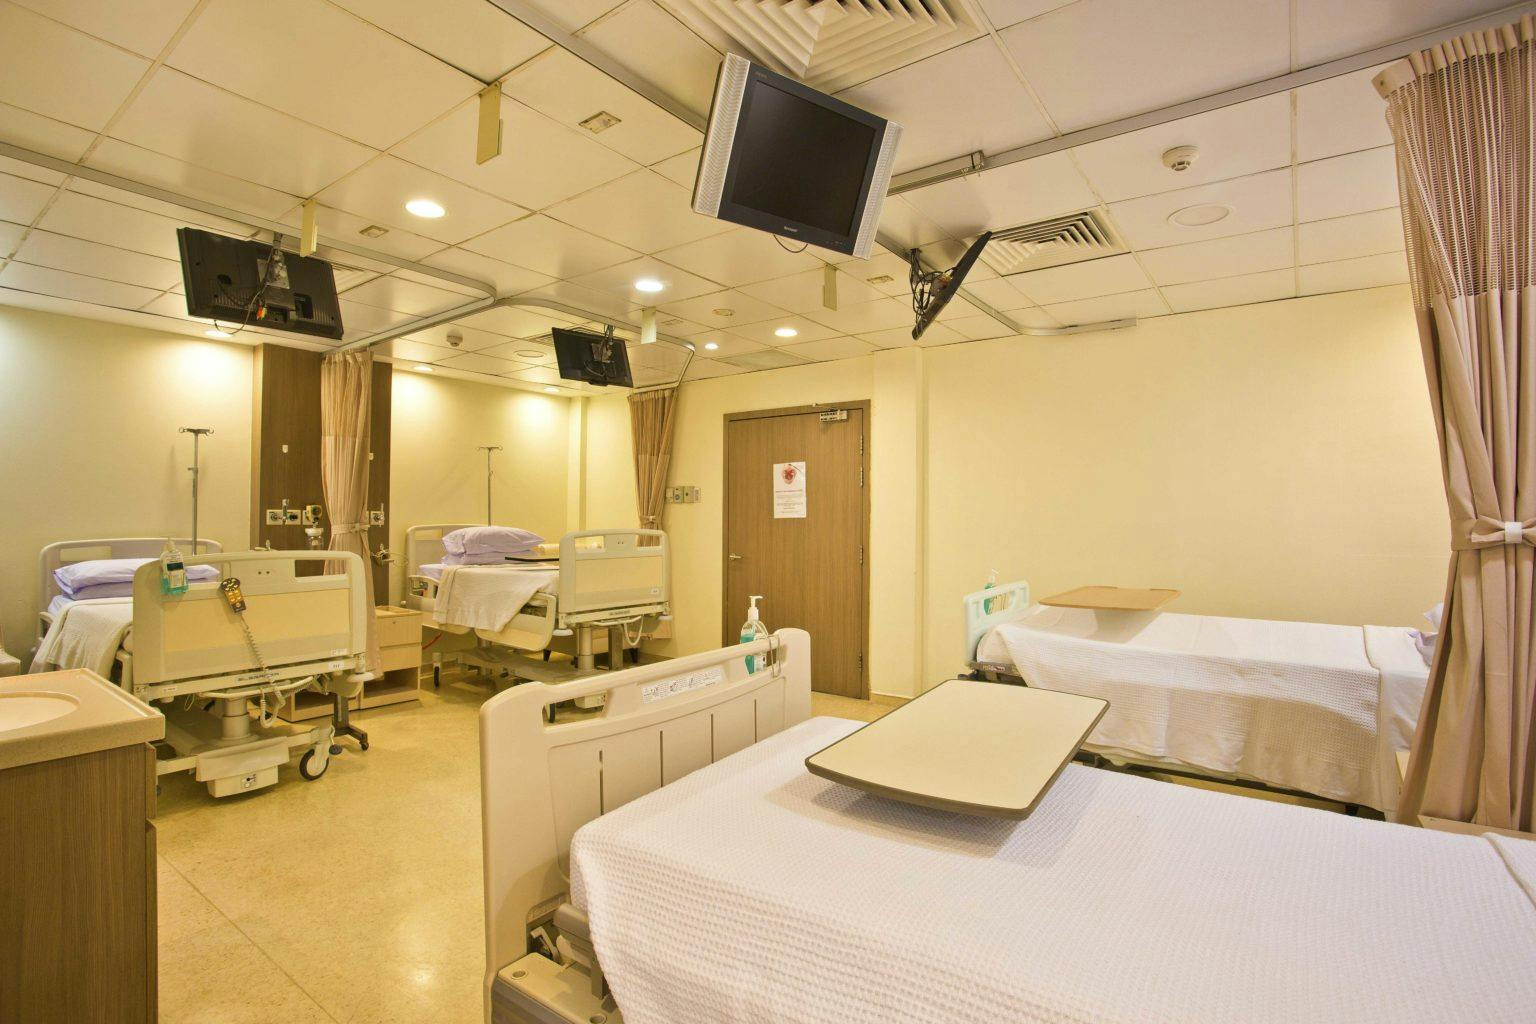 Thomson Medical Centre 4-bedded room view